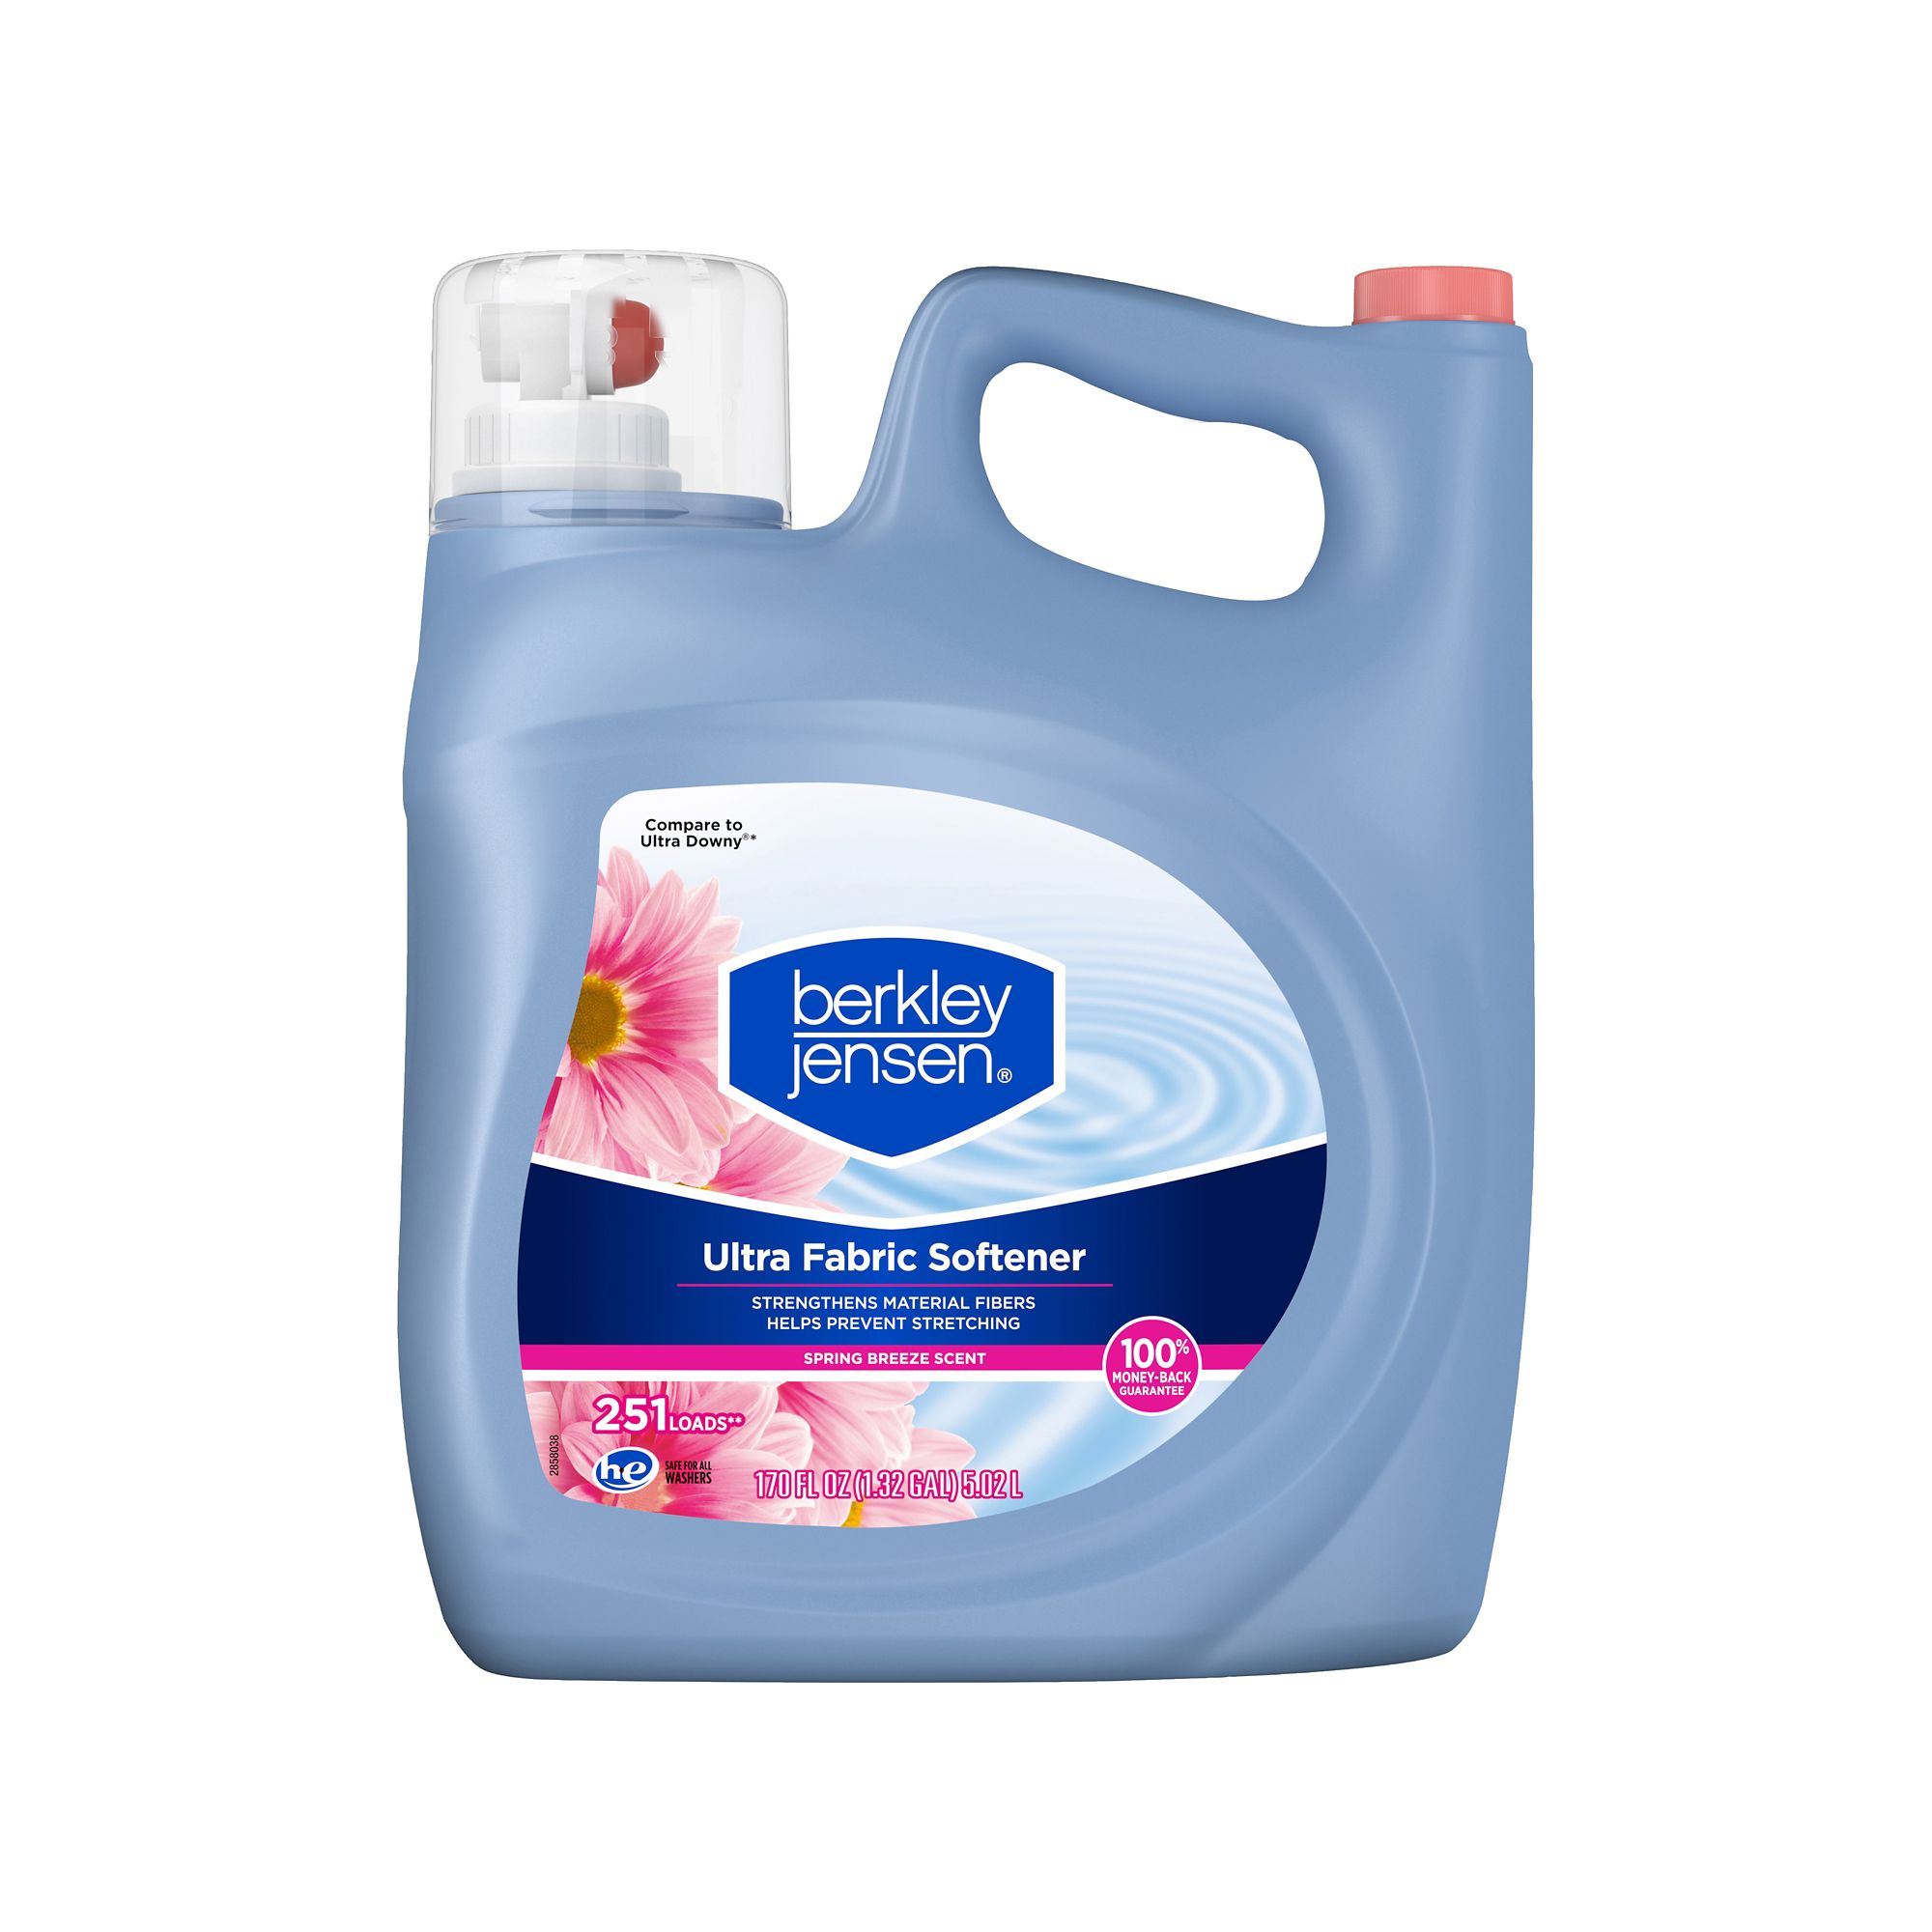 Clean Breeze Scent Inspired by Downy Fabric Softener